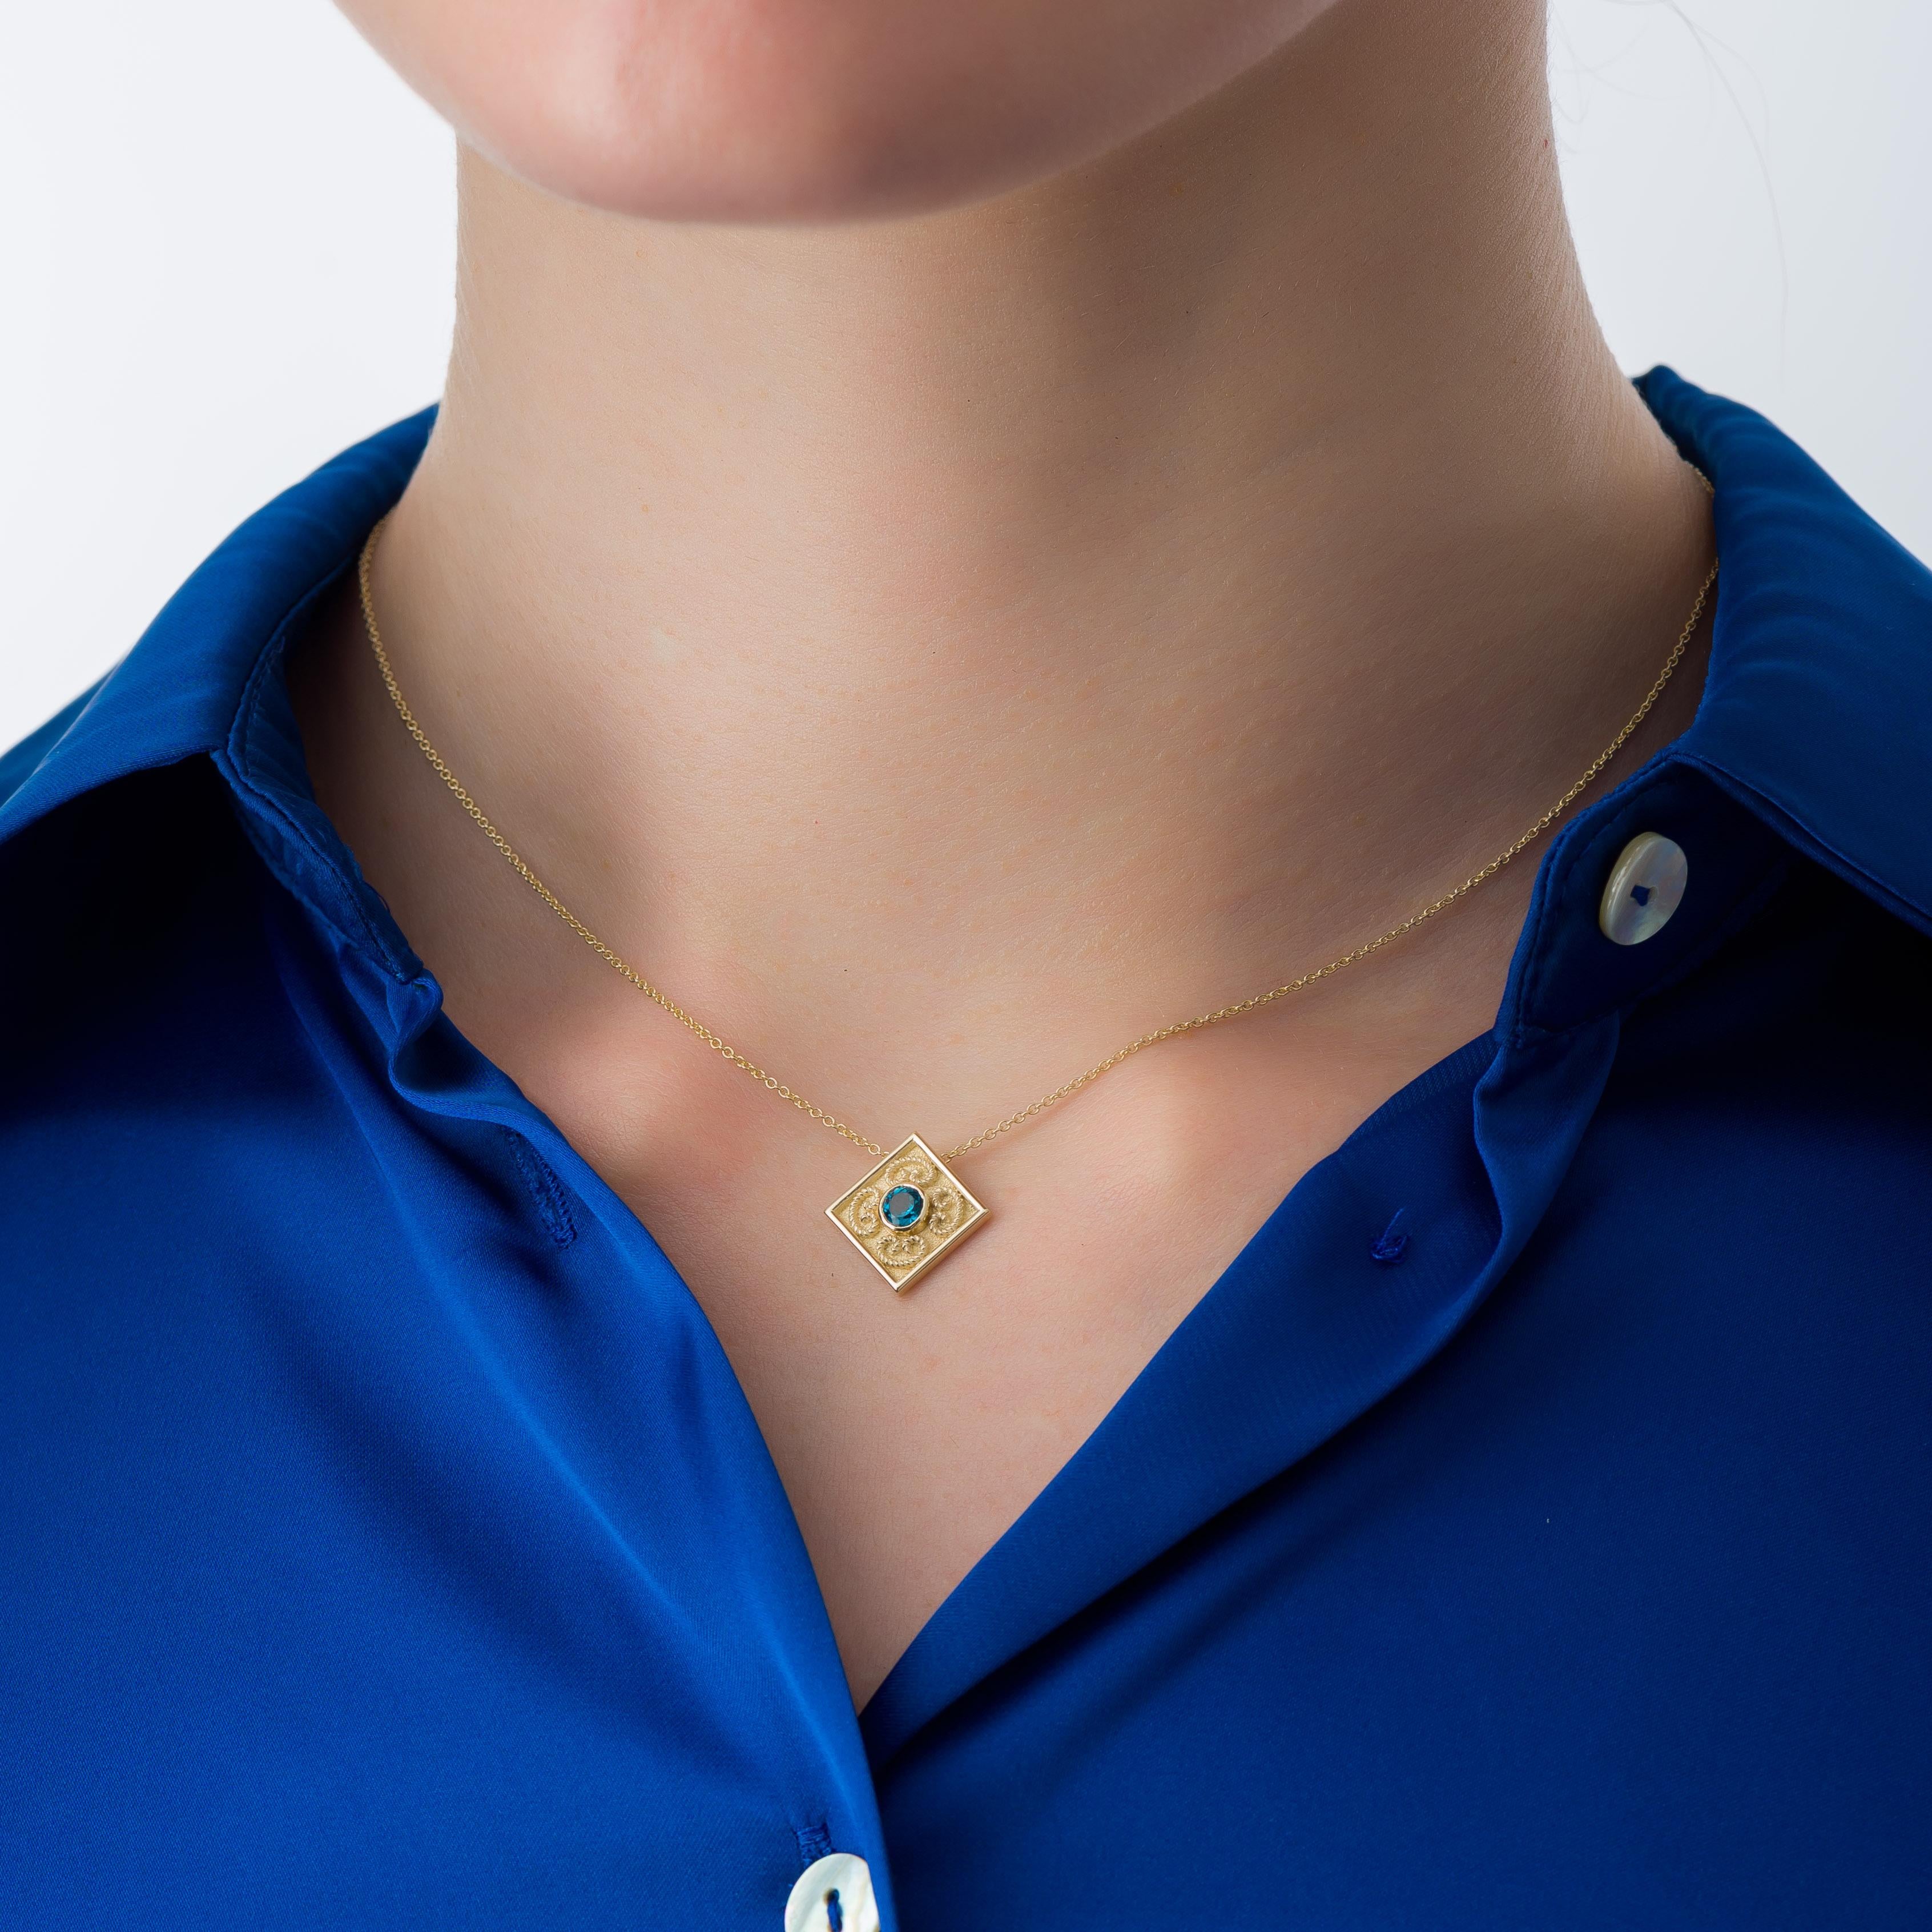 Admire the captivating beauty of a square gold pendant, embellished with intricate omega rope gold details and crowned by a resplendent round London topaz at its center—a harmonious symphony of design and color that radiates timeless charm.

100%